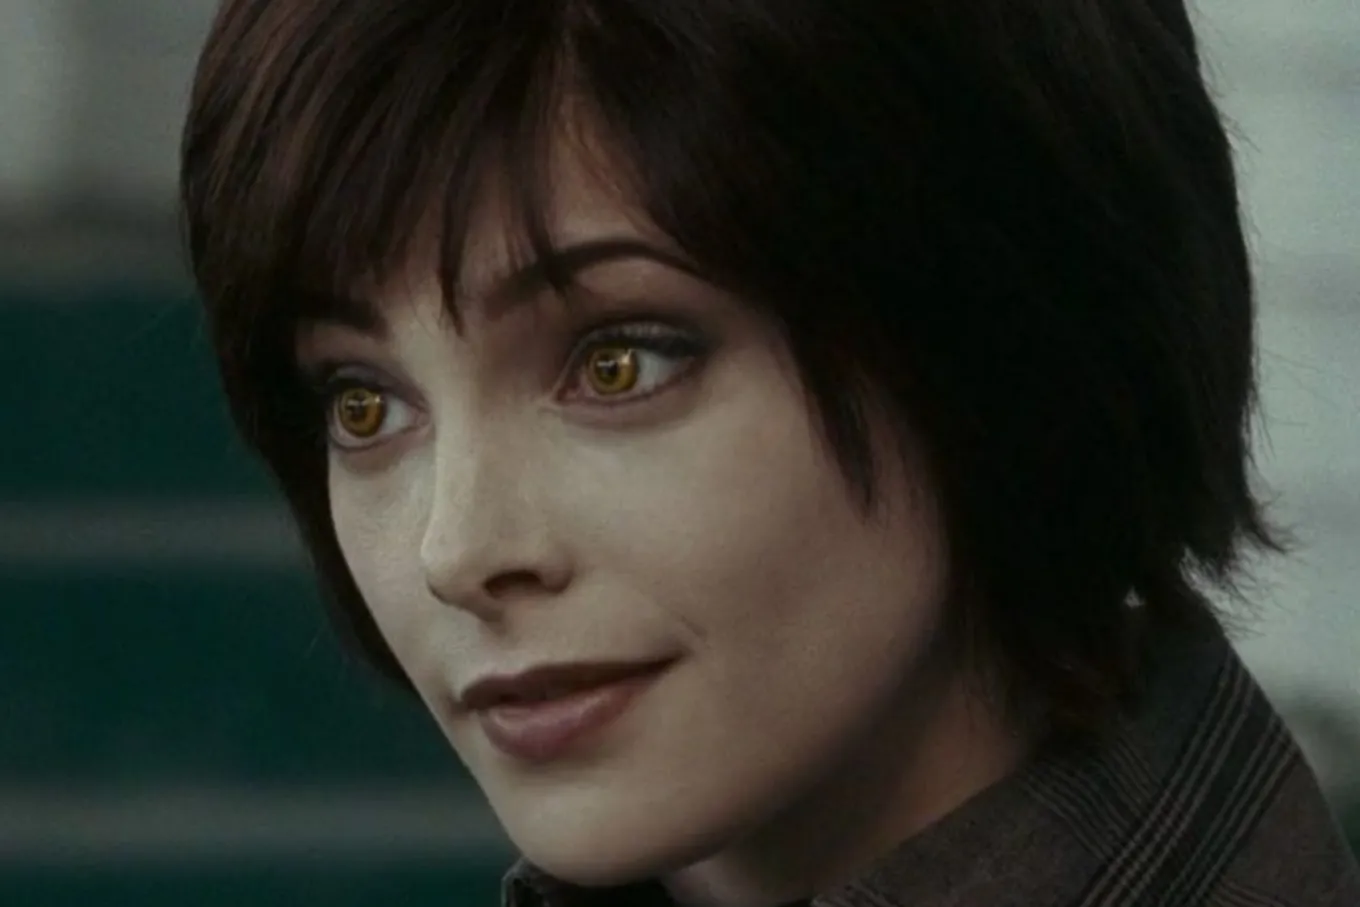 Alice Cullen from the "Twilight" movies